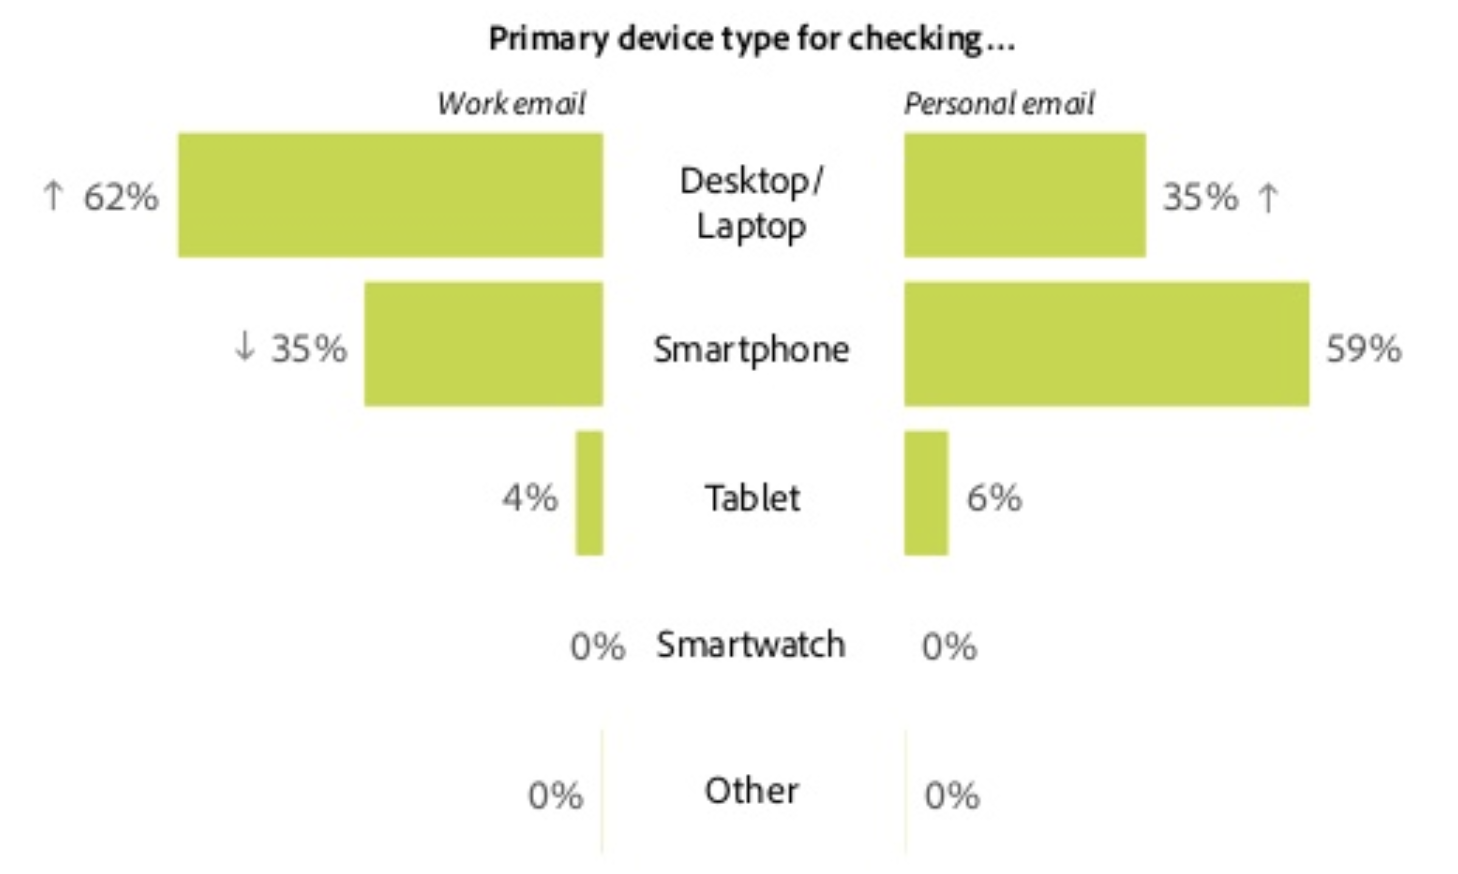 devices used for checking work and personal email